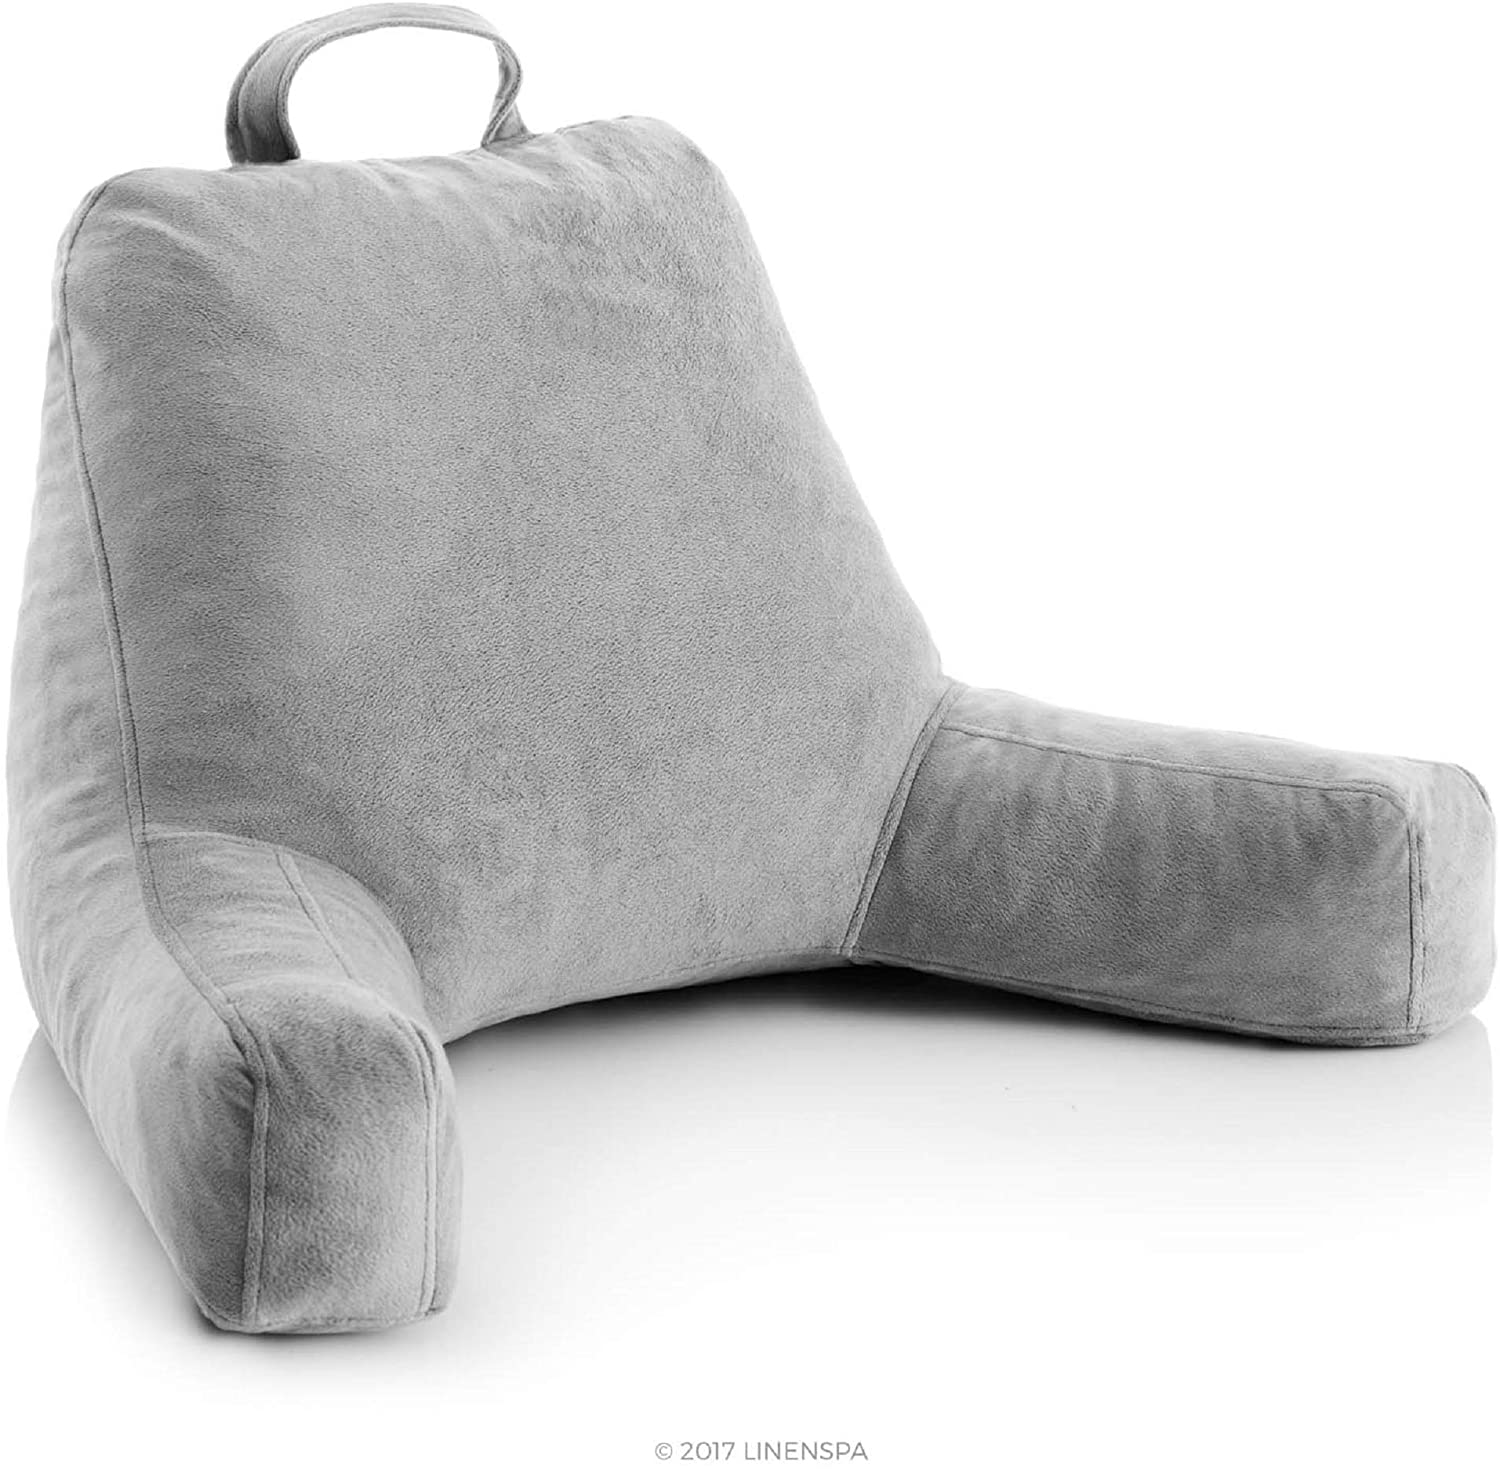 Best Backrest Pillow in 2020 Review and Guide